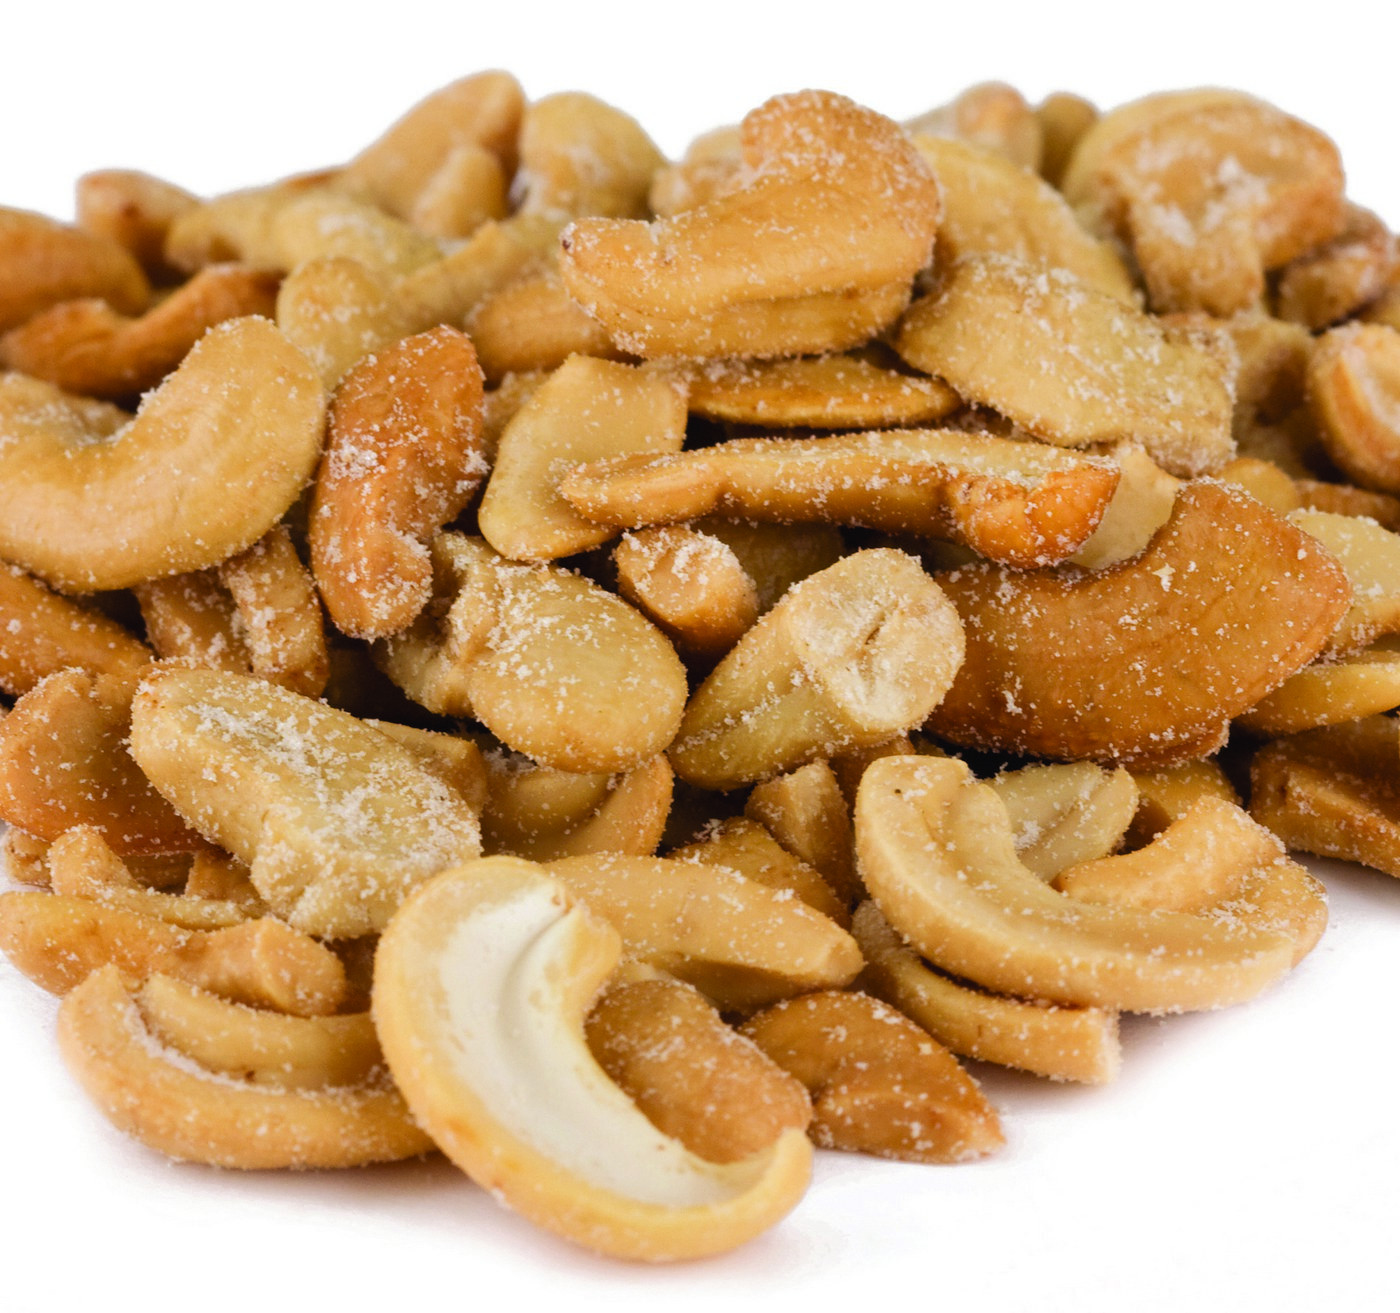 Sweet Gourmet SweetGourmet Nut Cashew Pieces Large (Roasted & Salted)